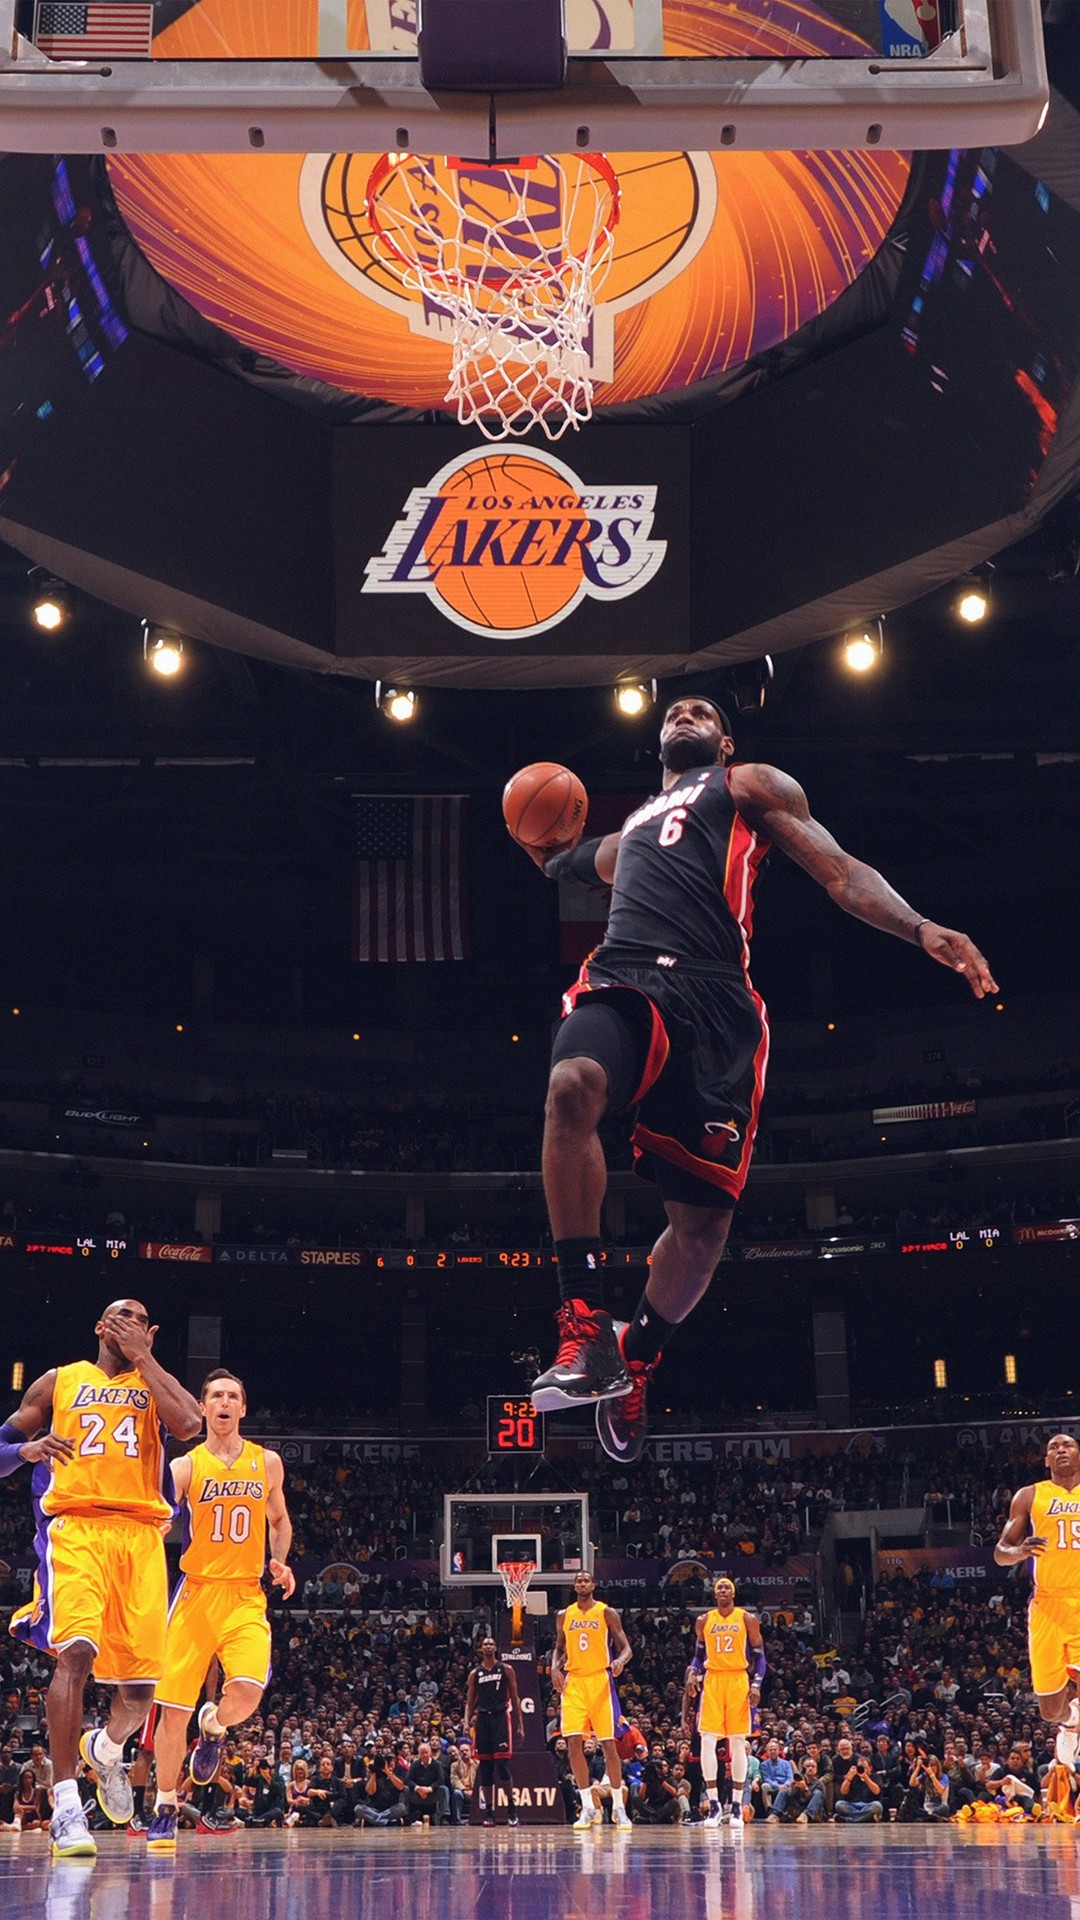 Miami Heat v Los Angeles Lakers – Mobile Wallpapers